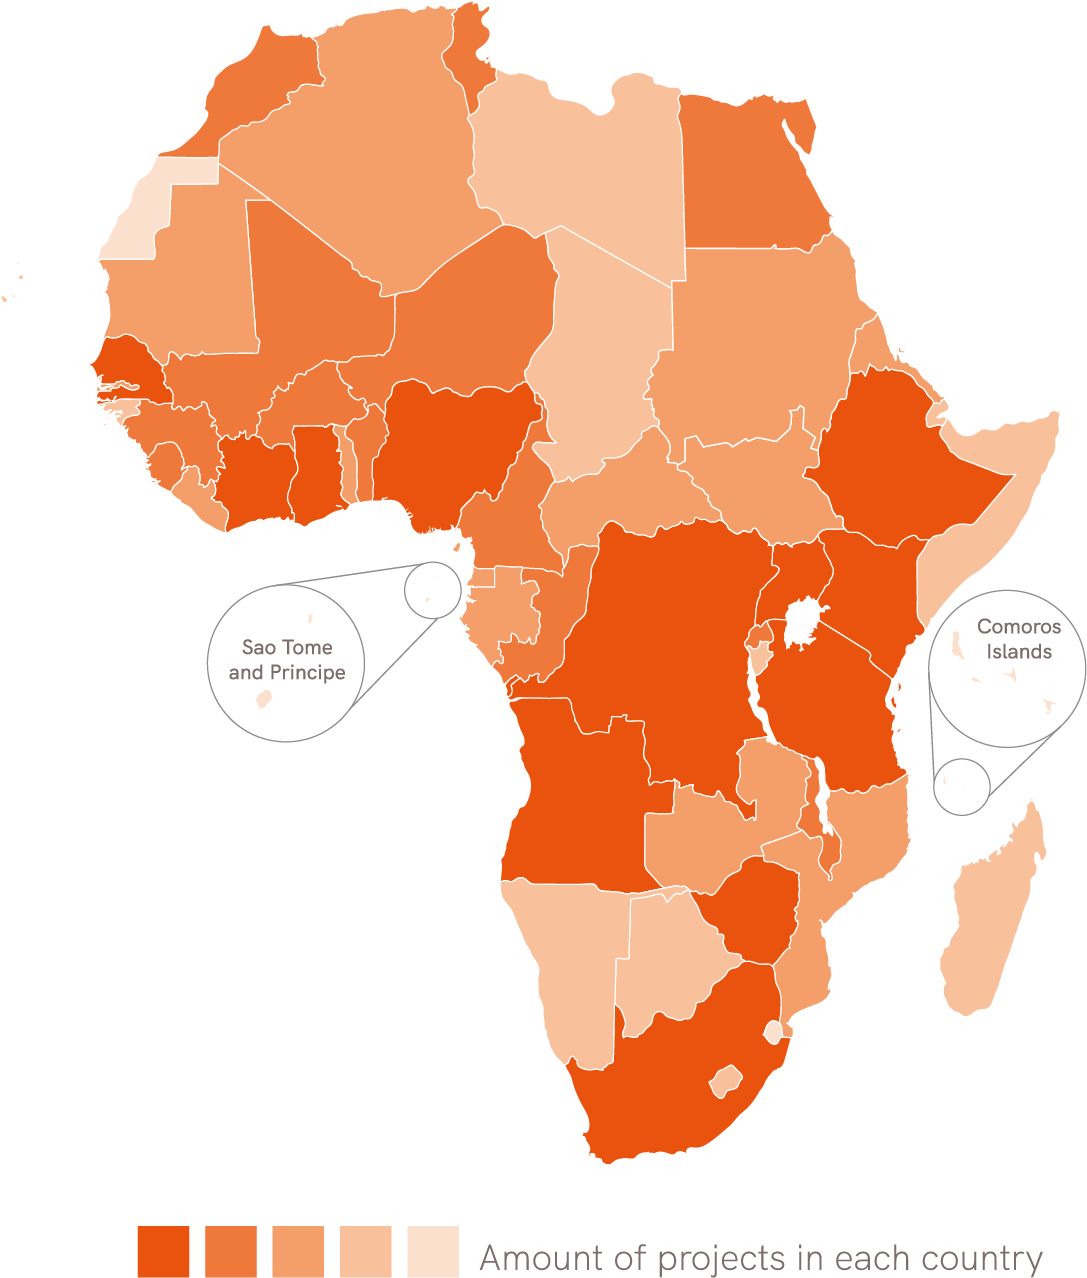 Map of Africa showing where Africa Integrity has conducted investigations